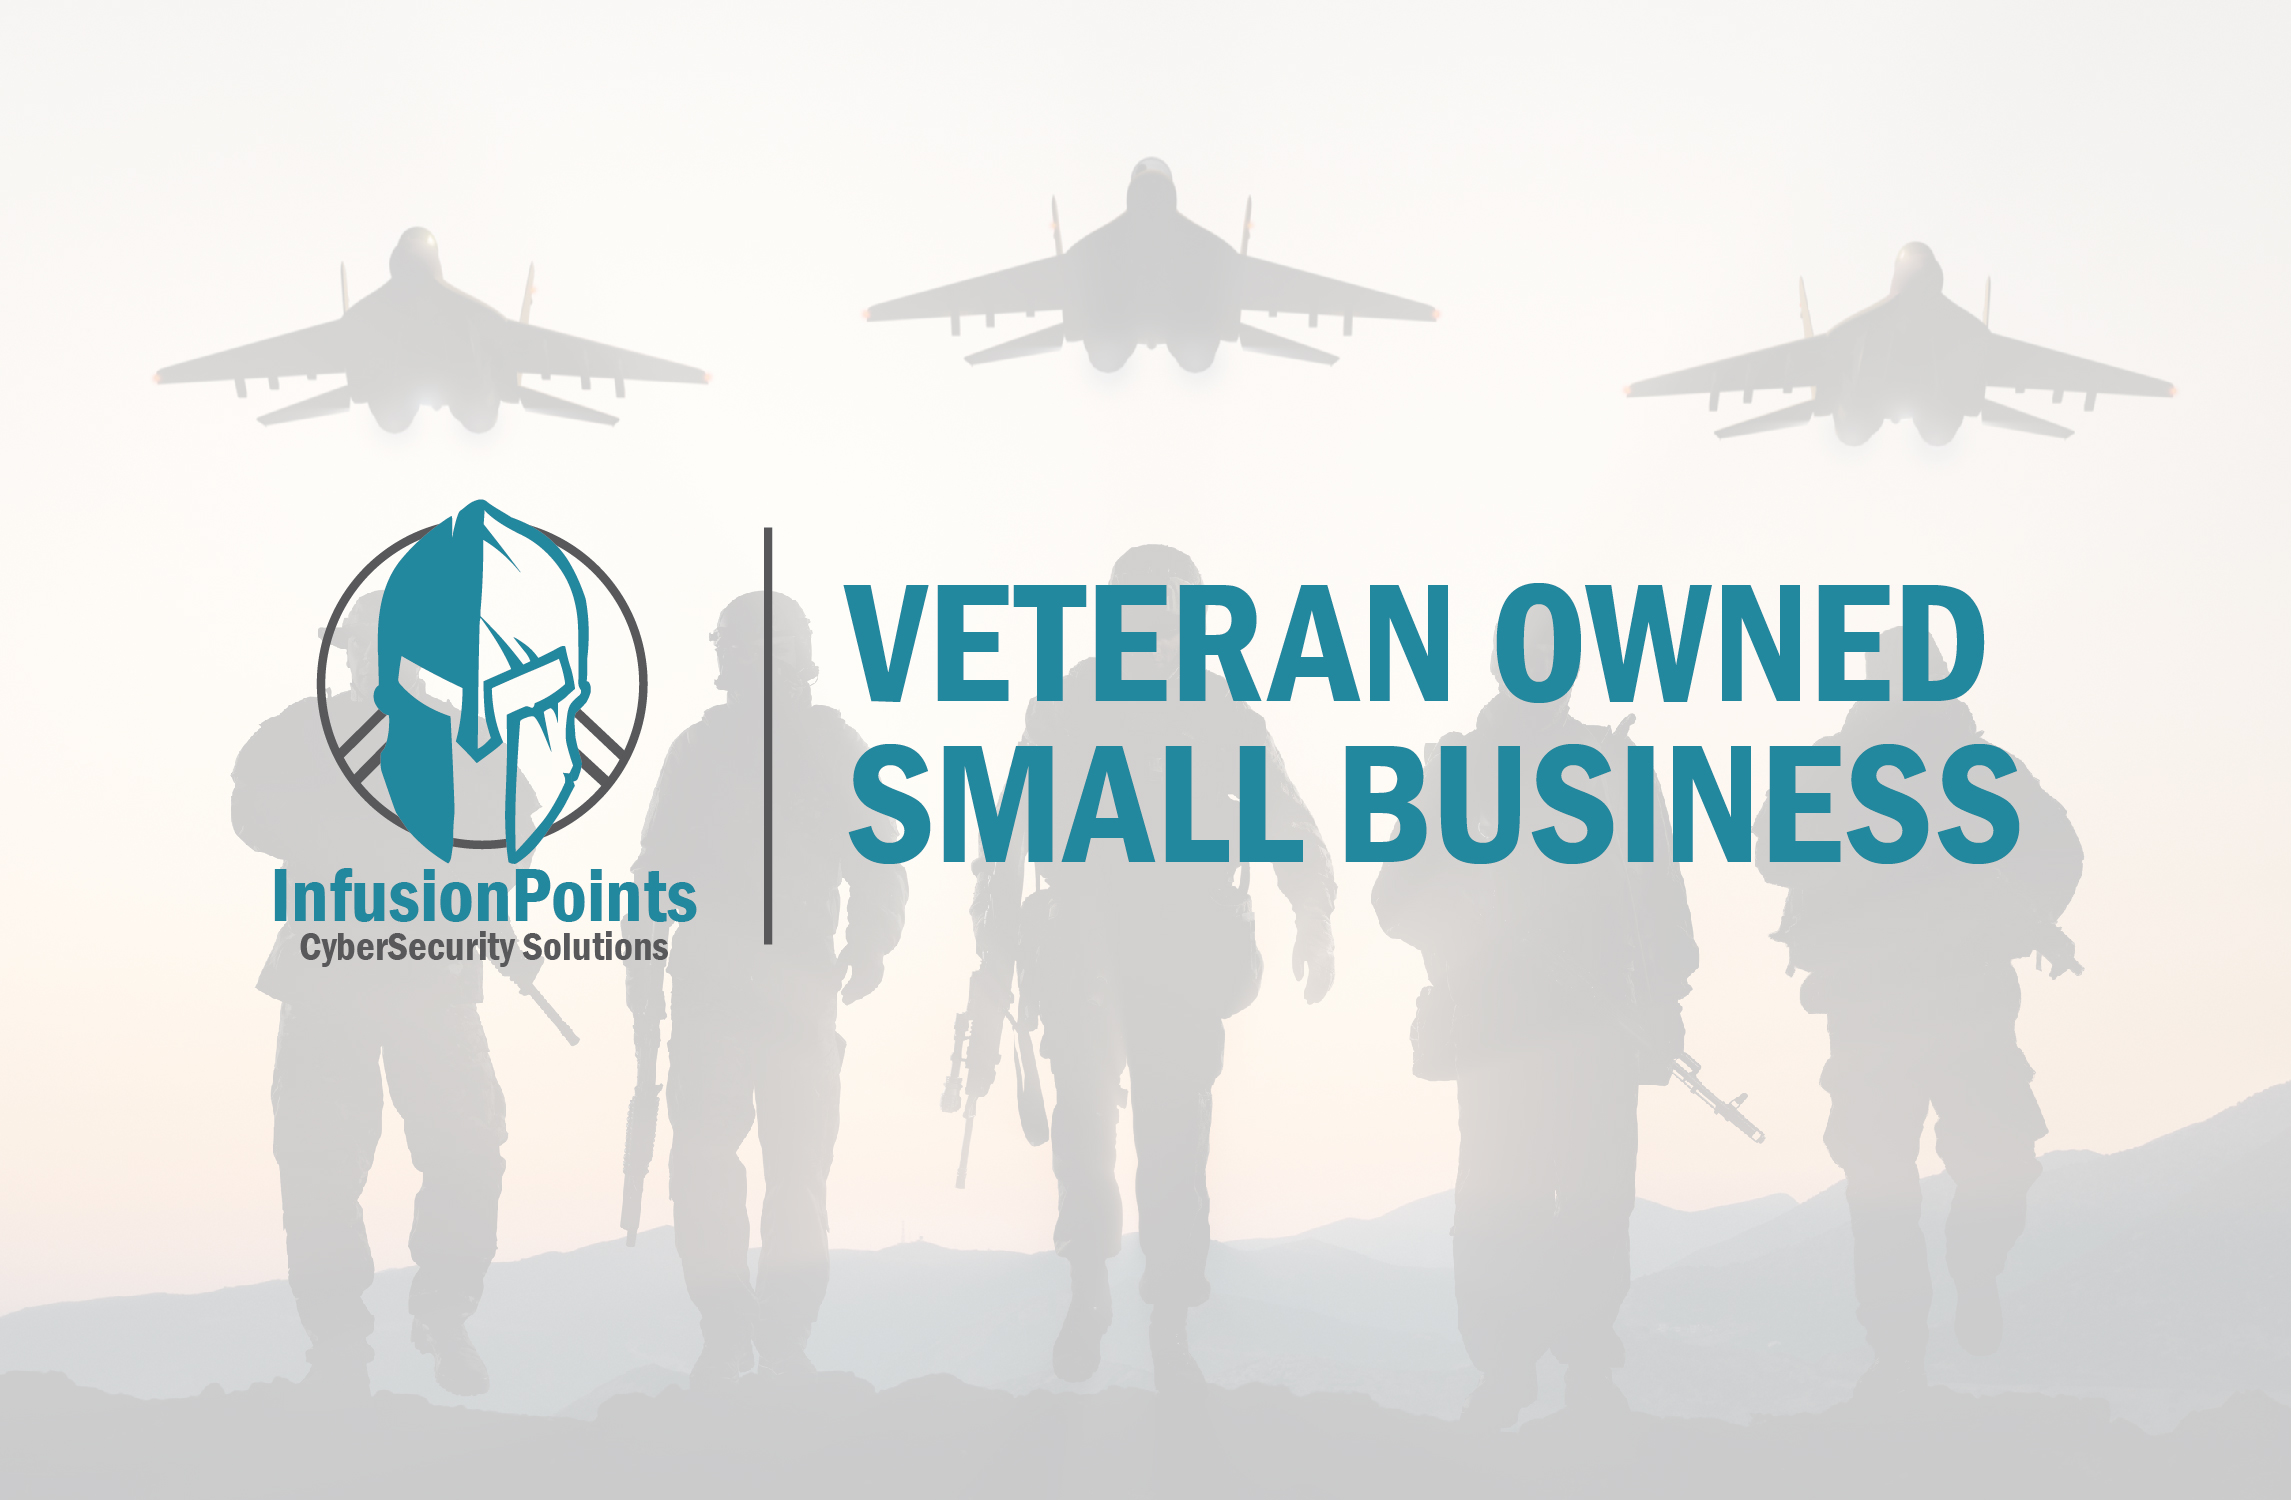 InfusionPoints Veteran Owned Small Business